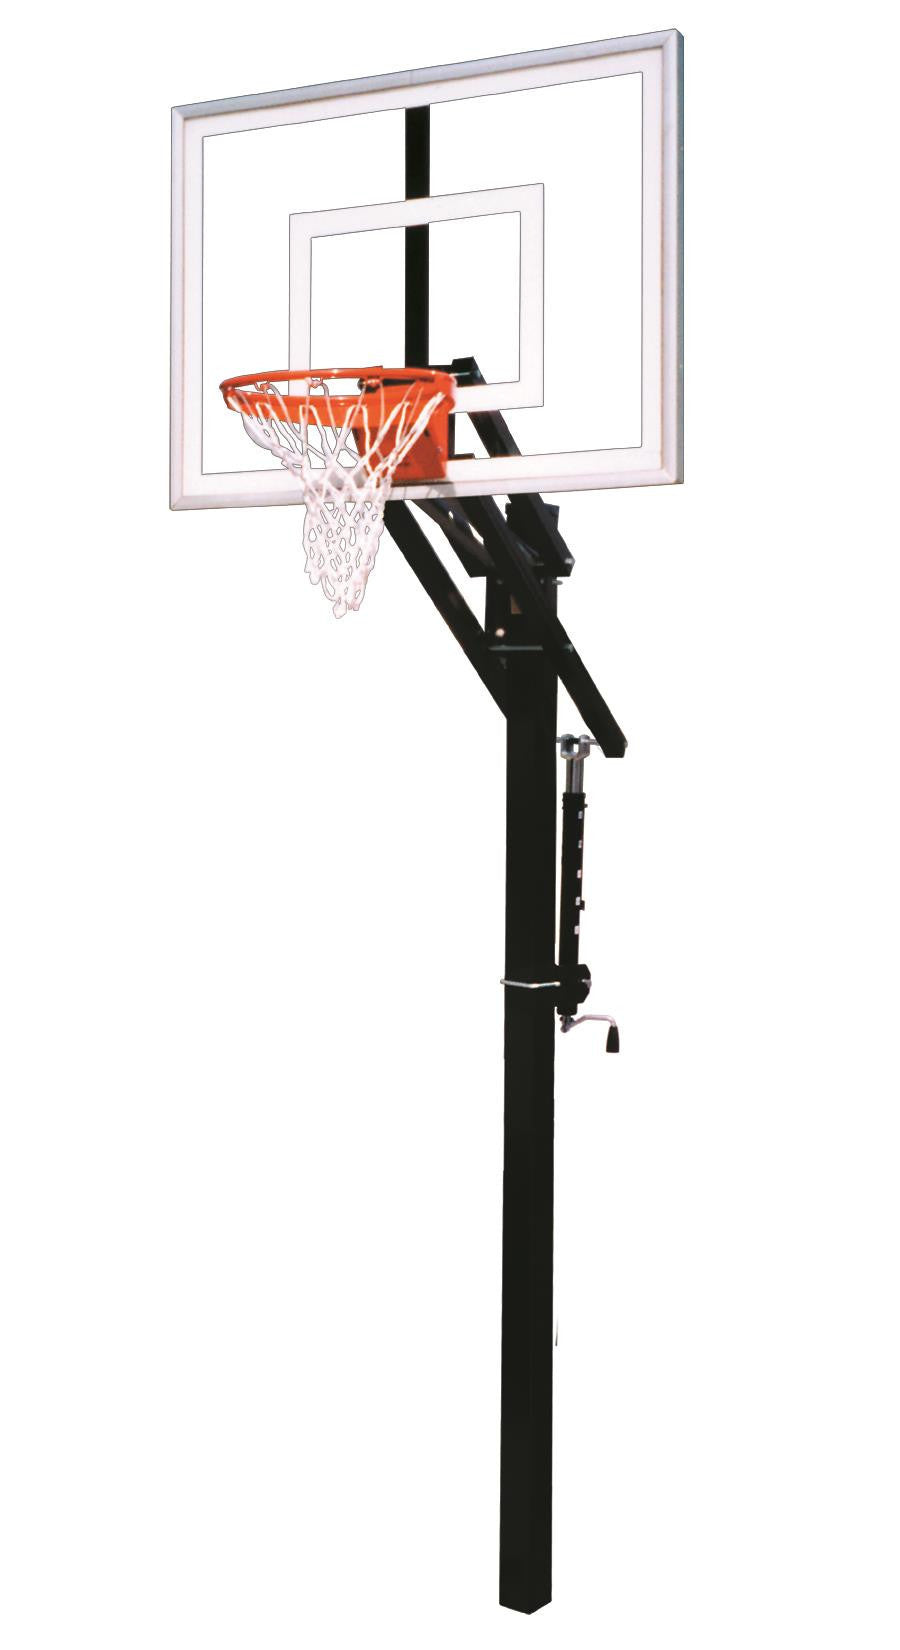 First Team Jam Turbo In Ground Outdoor Adjustable Basketball Hoop 54 inch Tempered Glass